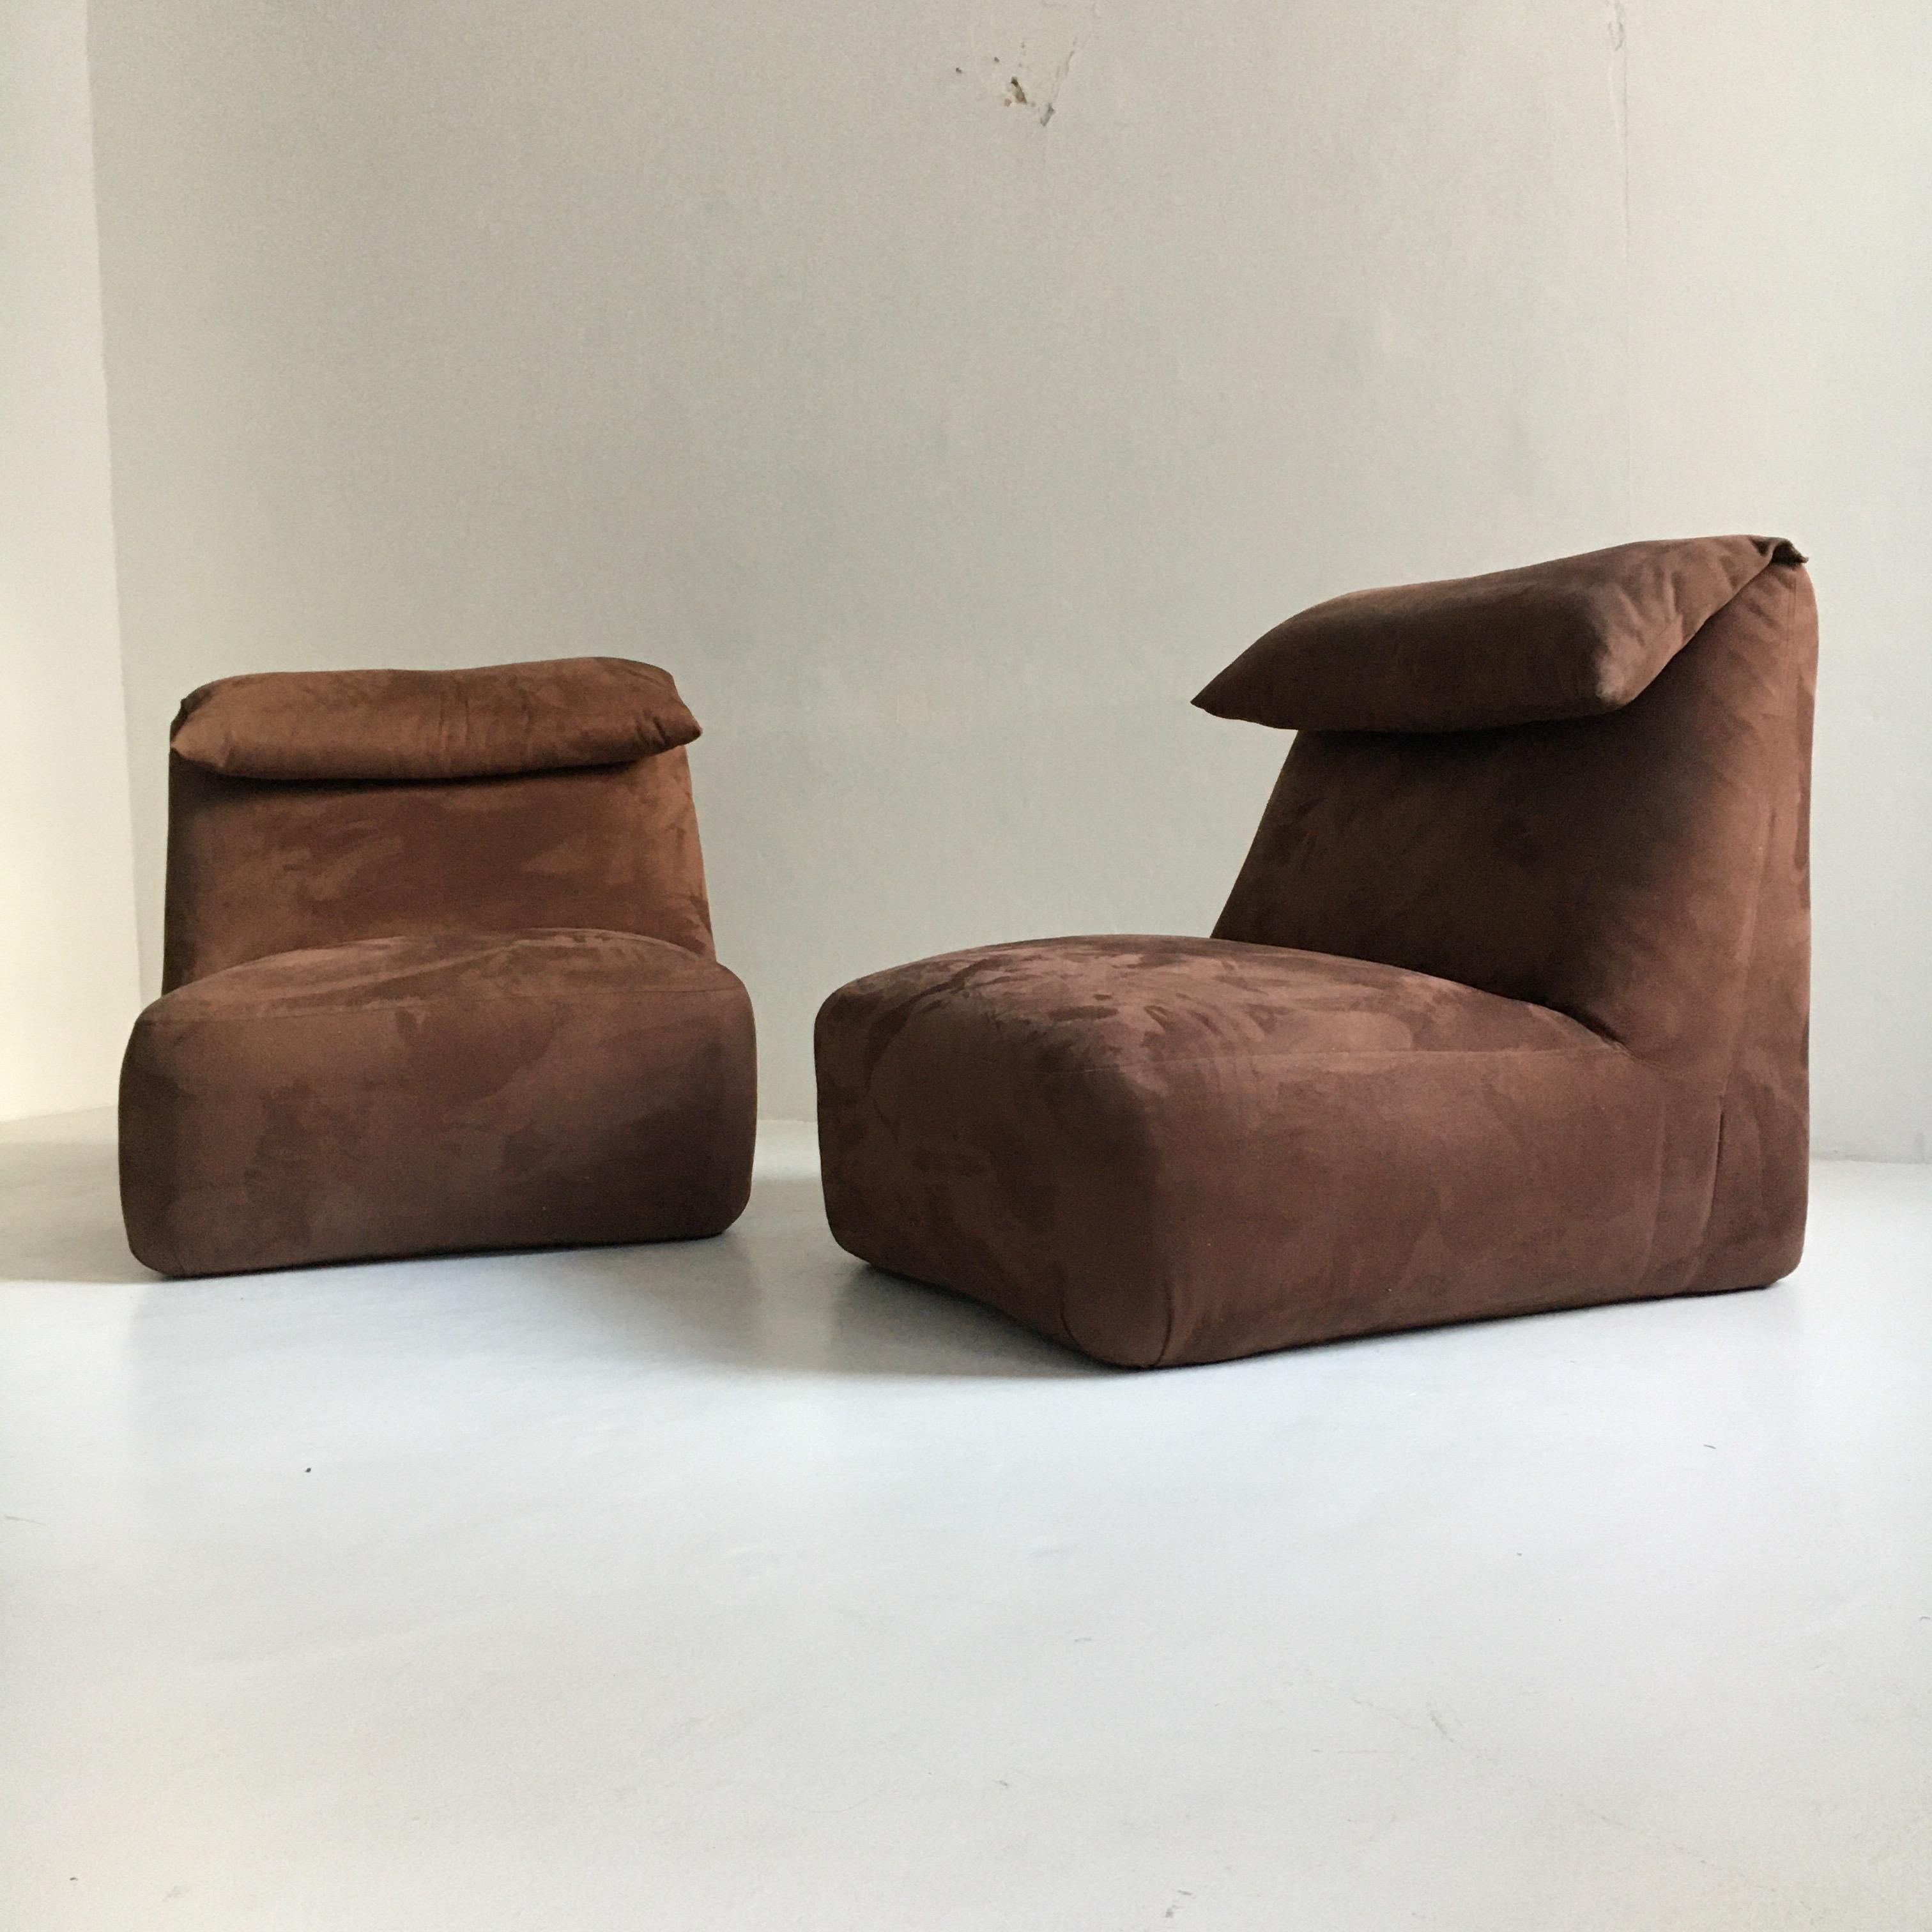 Mario Bellini Pair of 'Le Bambole' Lounge Chairs, Italy, 1970s For Sale 2